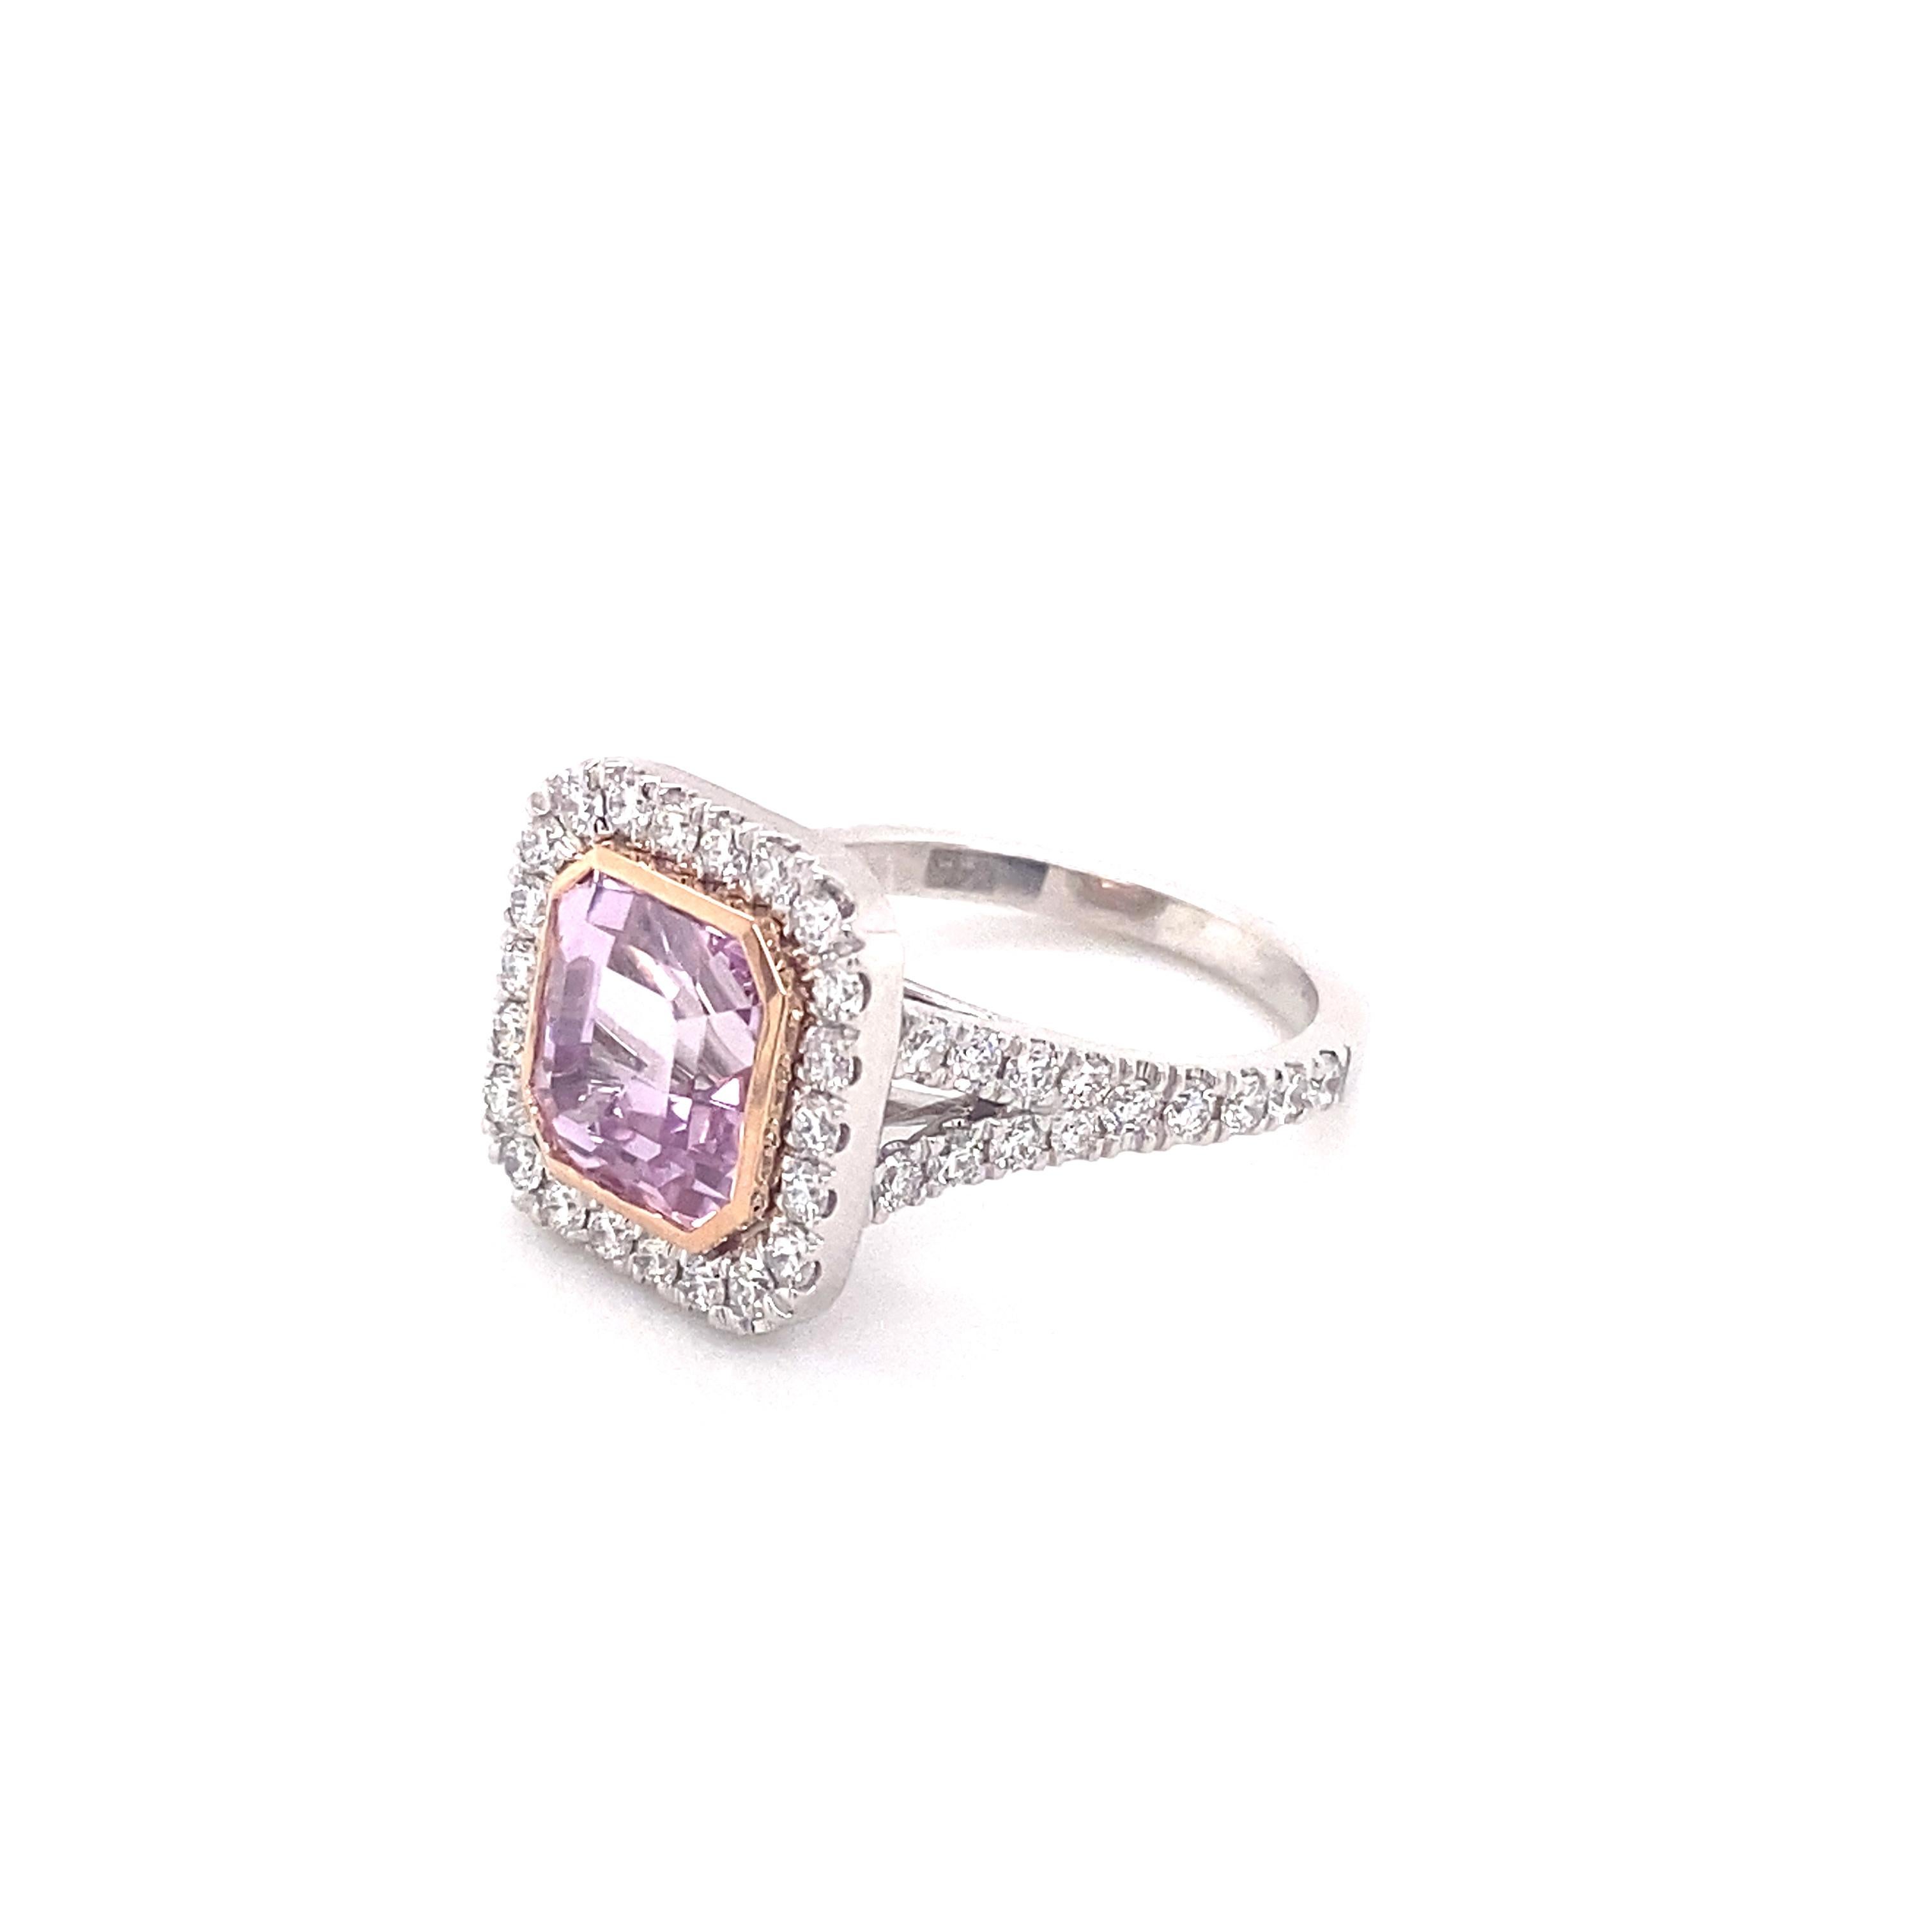 This beauty of a ring features a 4.14 carat natural purple-pink sapphire, no heat, set in a 14 karat white gold cushion shaped split shank halo ring with .90ctw round brilliant cut diamonds. The sapphire is surrounded by a 14 karat rose gold asscher